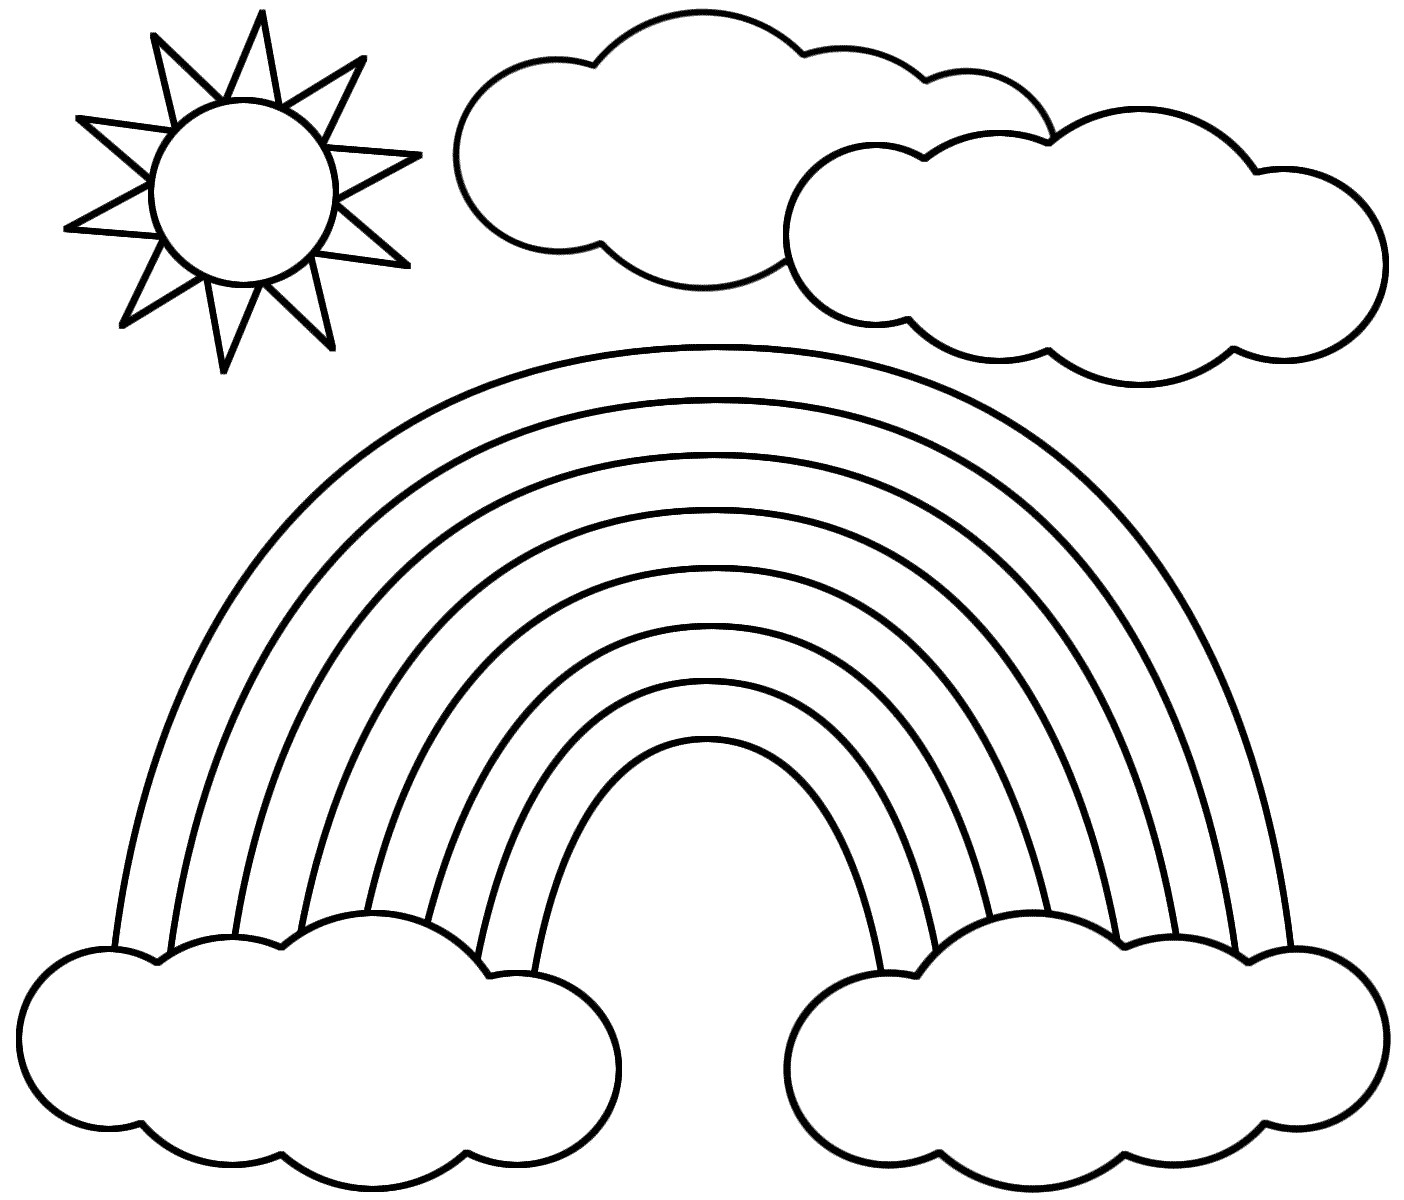 Sun Coloring Pages For Kids
 Sun Coloring Pages